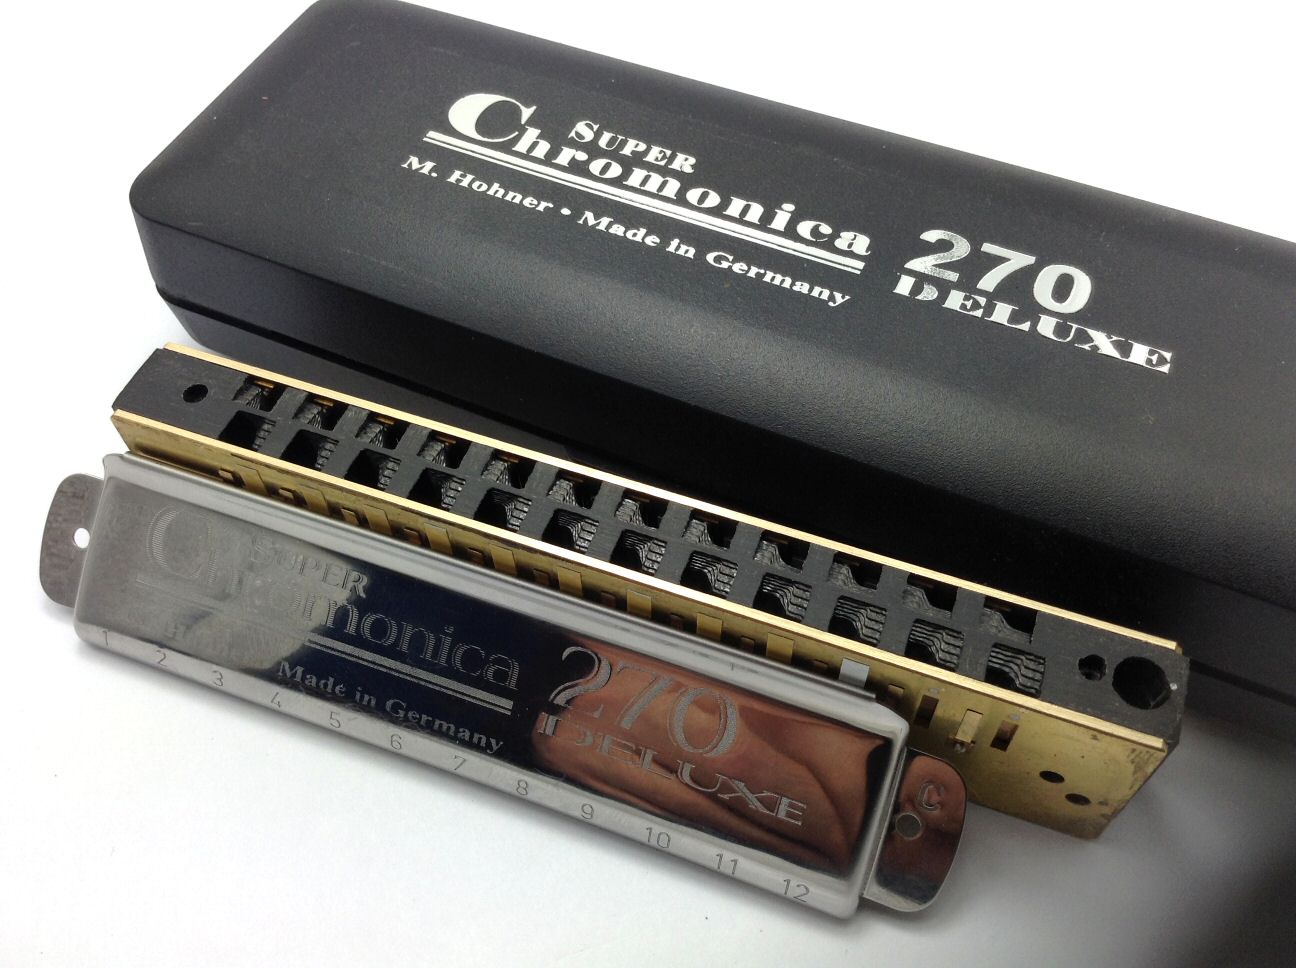 Hohner 270 Deluxe Power Combs